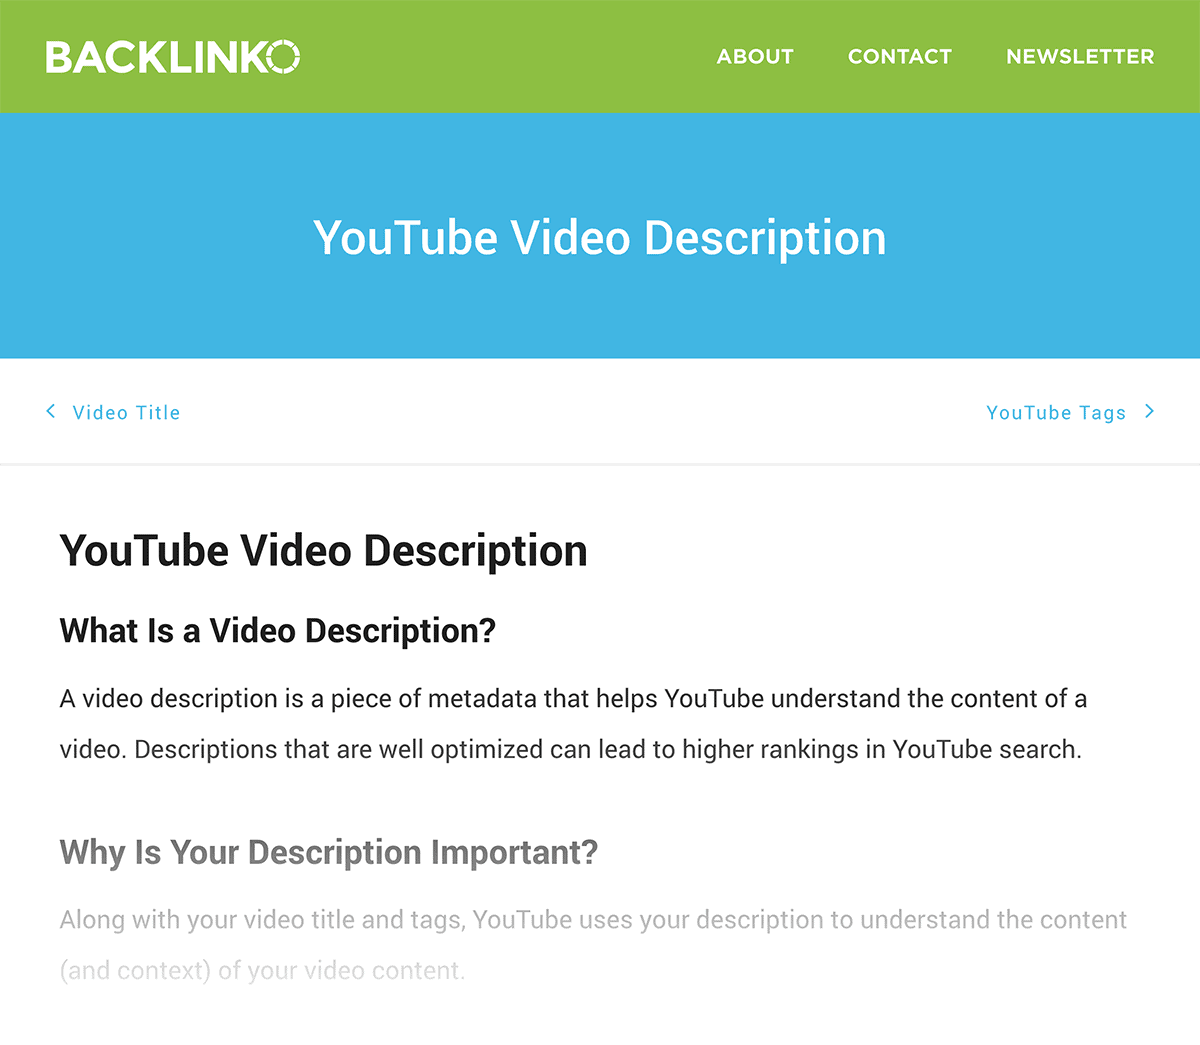 Backlinko – YouTube Video Description post, optimized for Definition Featured Snippet